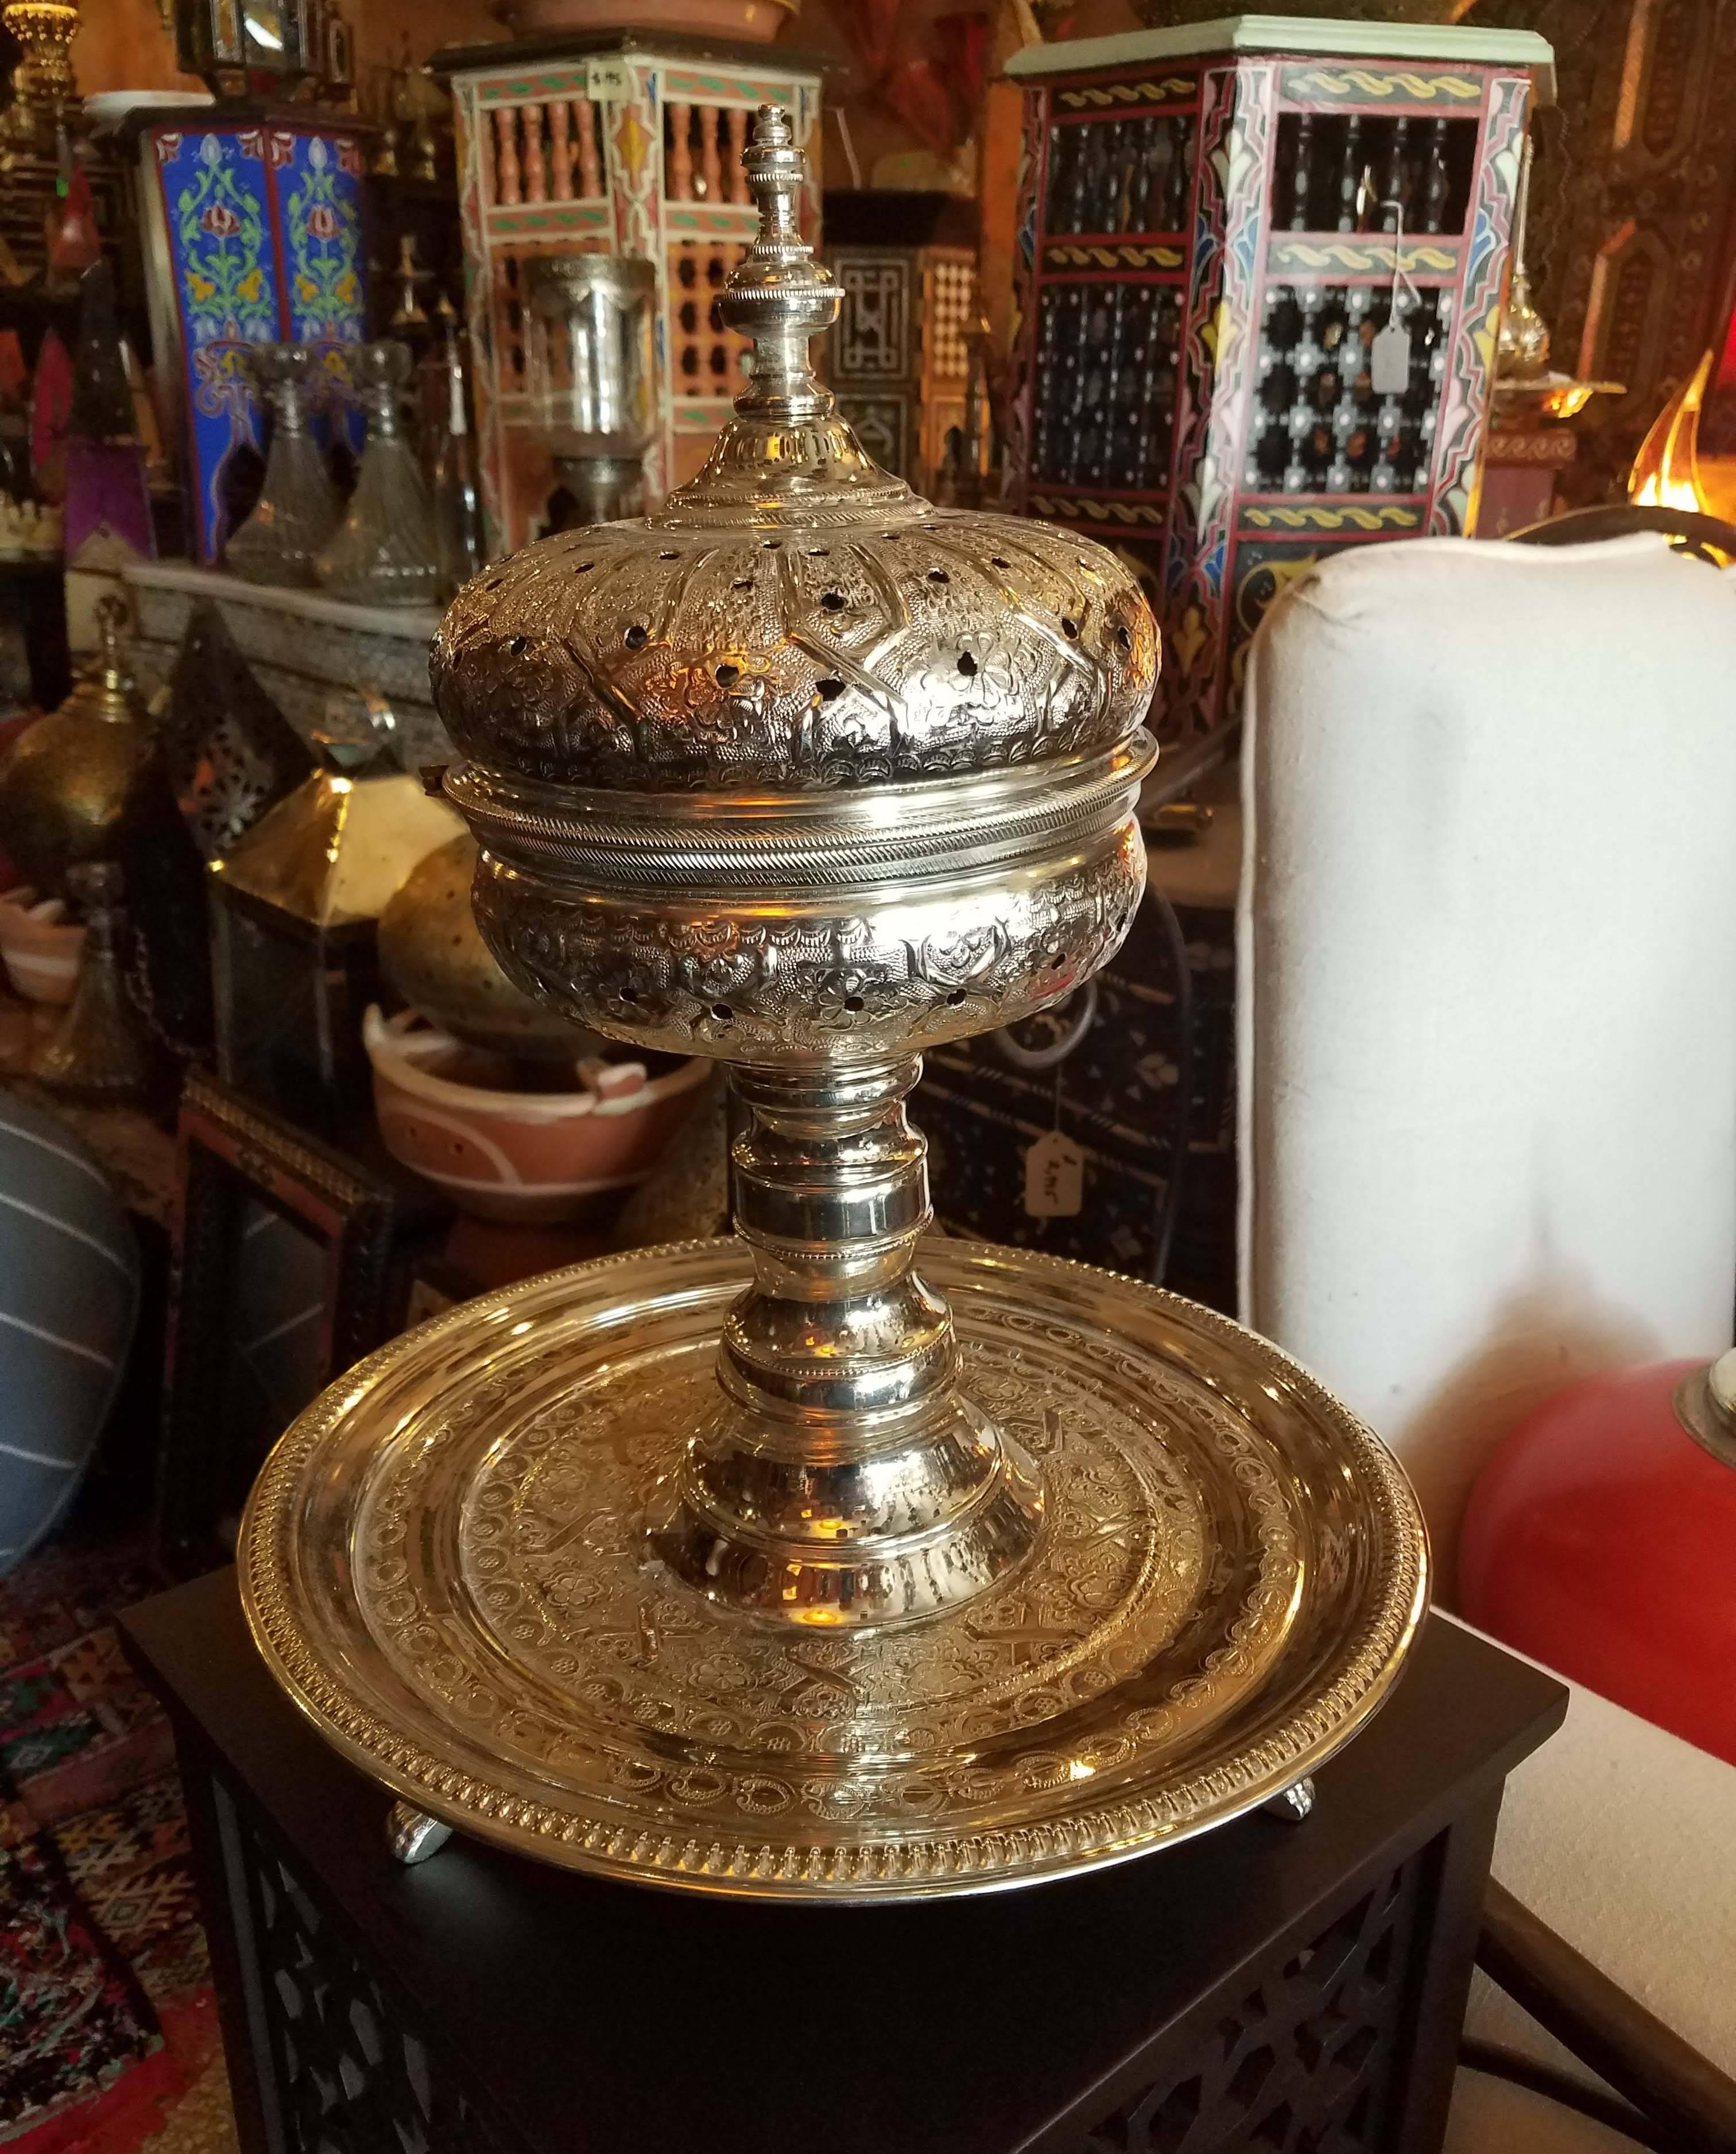 Just arrived! A beautiful Moroccan silver plated incense burner made in Casablanca. Used for a variety of purposes in Morocco, such as weddings ceremonies, baptisms, and other social and religious gatherings. Measuring approximately 17